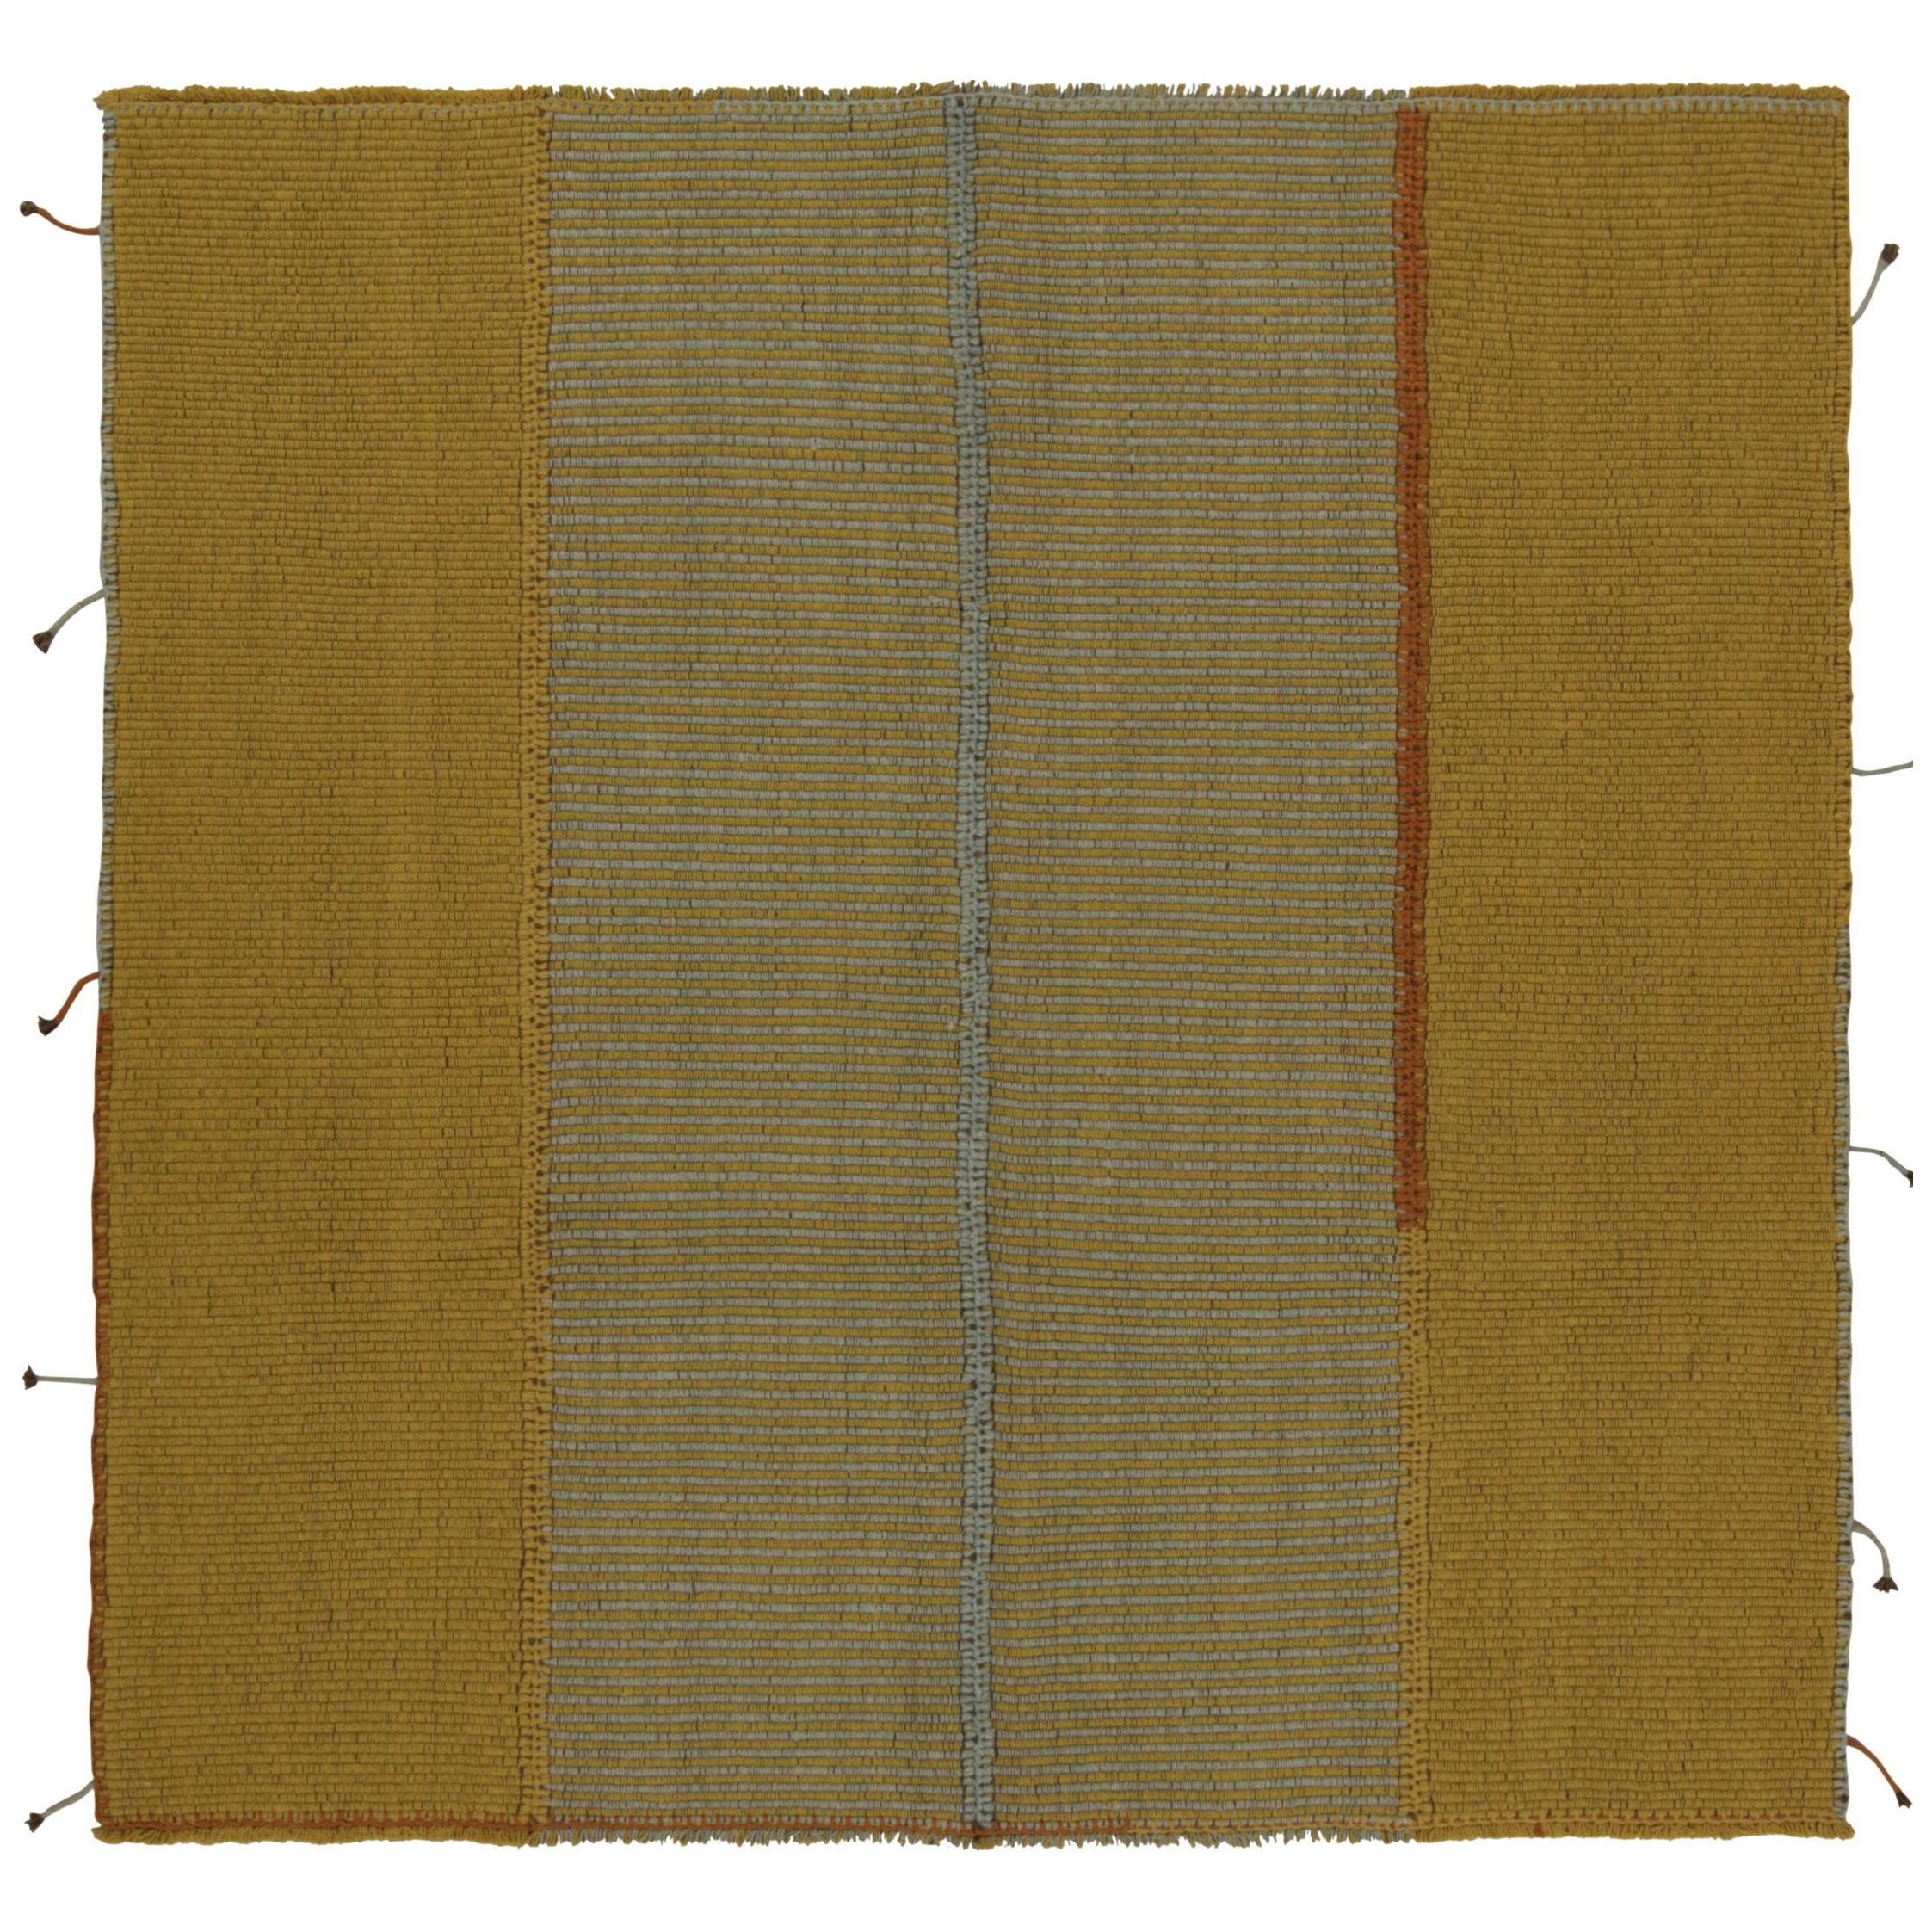 Rug & Kilim’s Contemporary Square Kilim in Ochre, Blue Stripes and Brown Accents